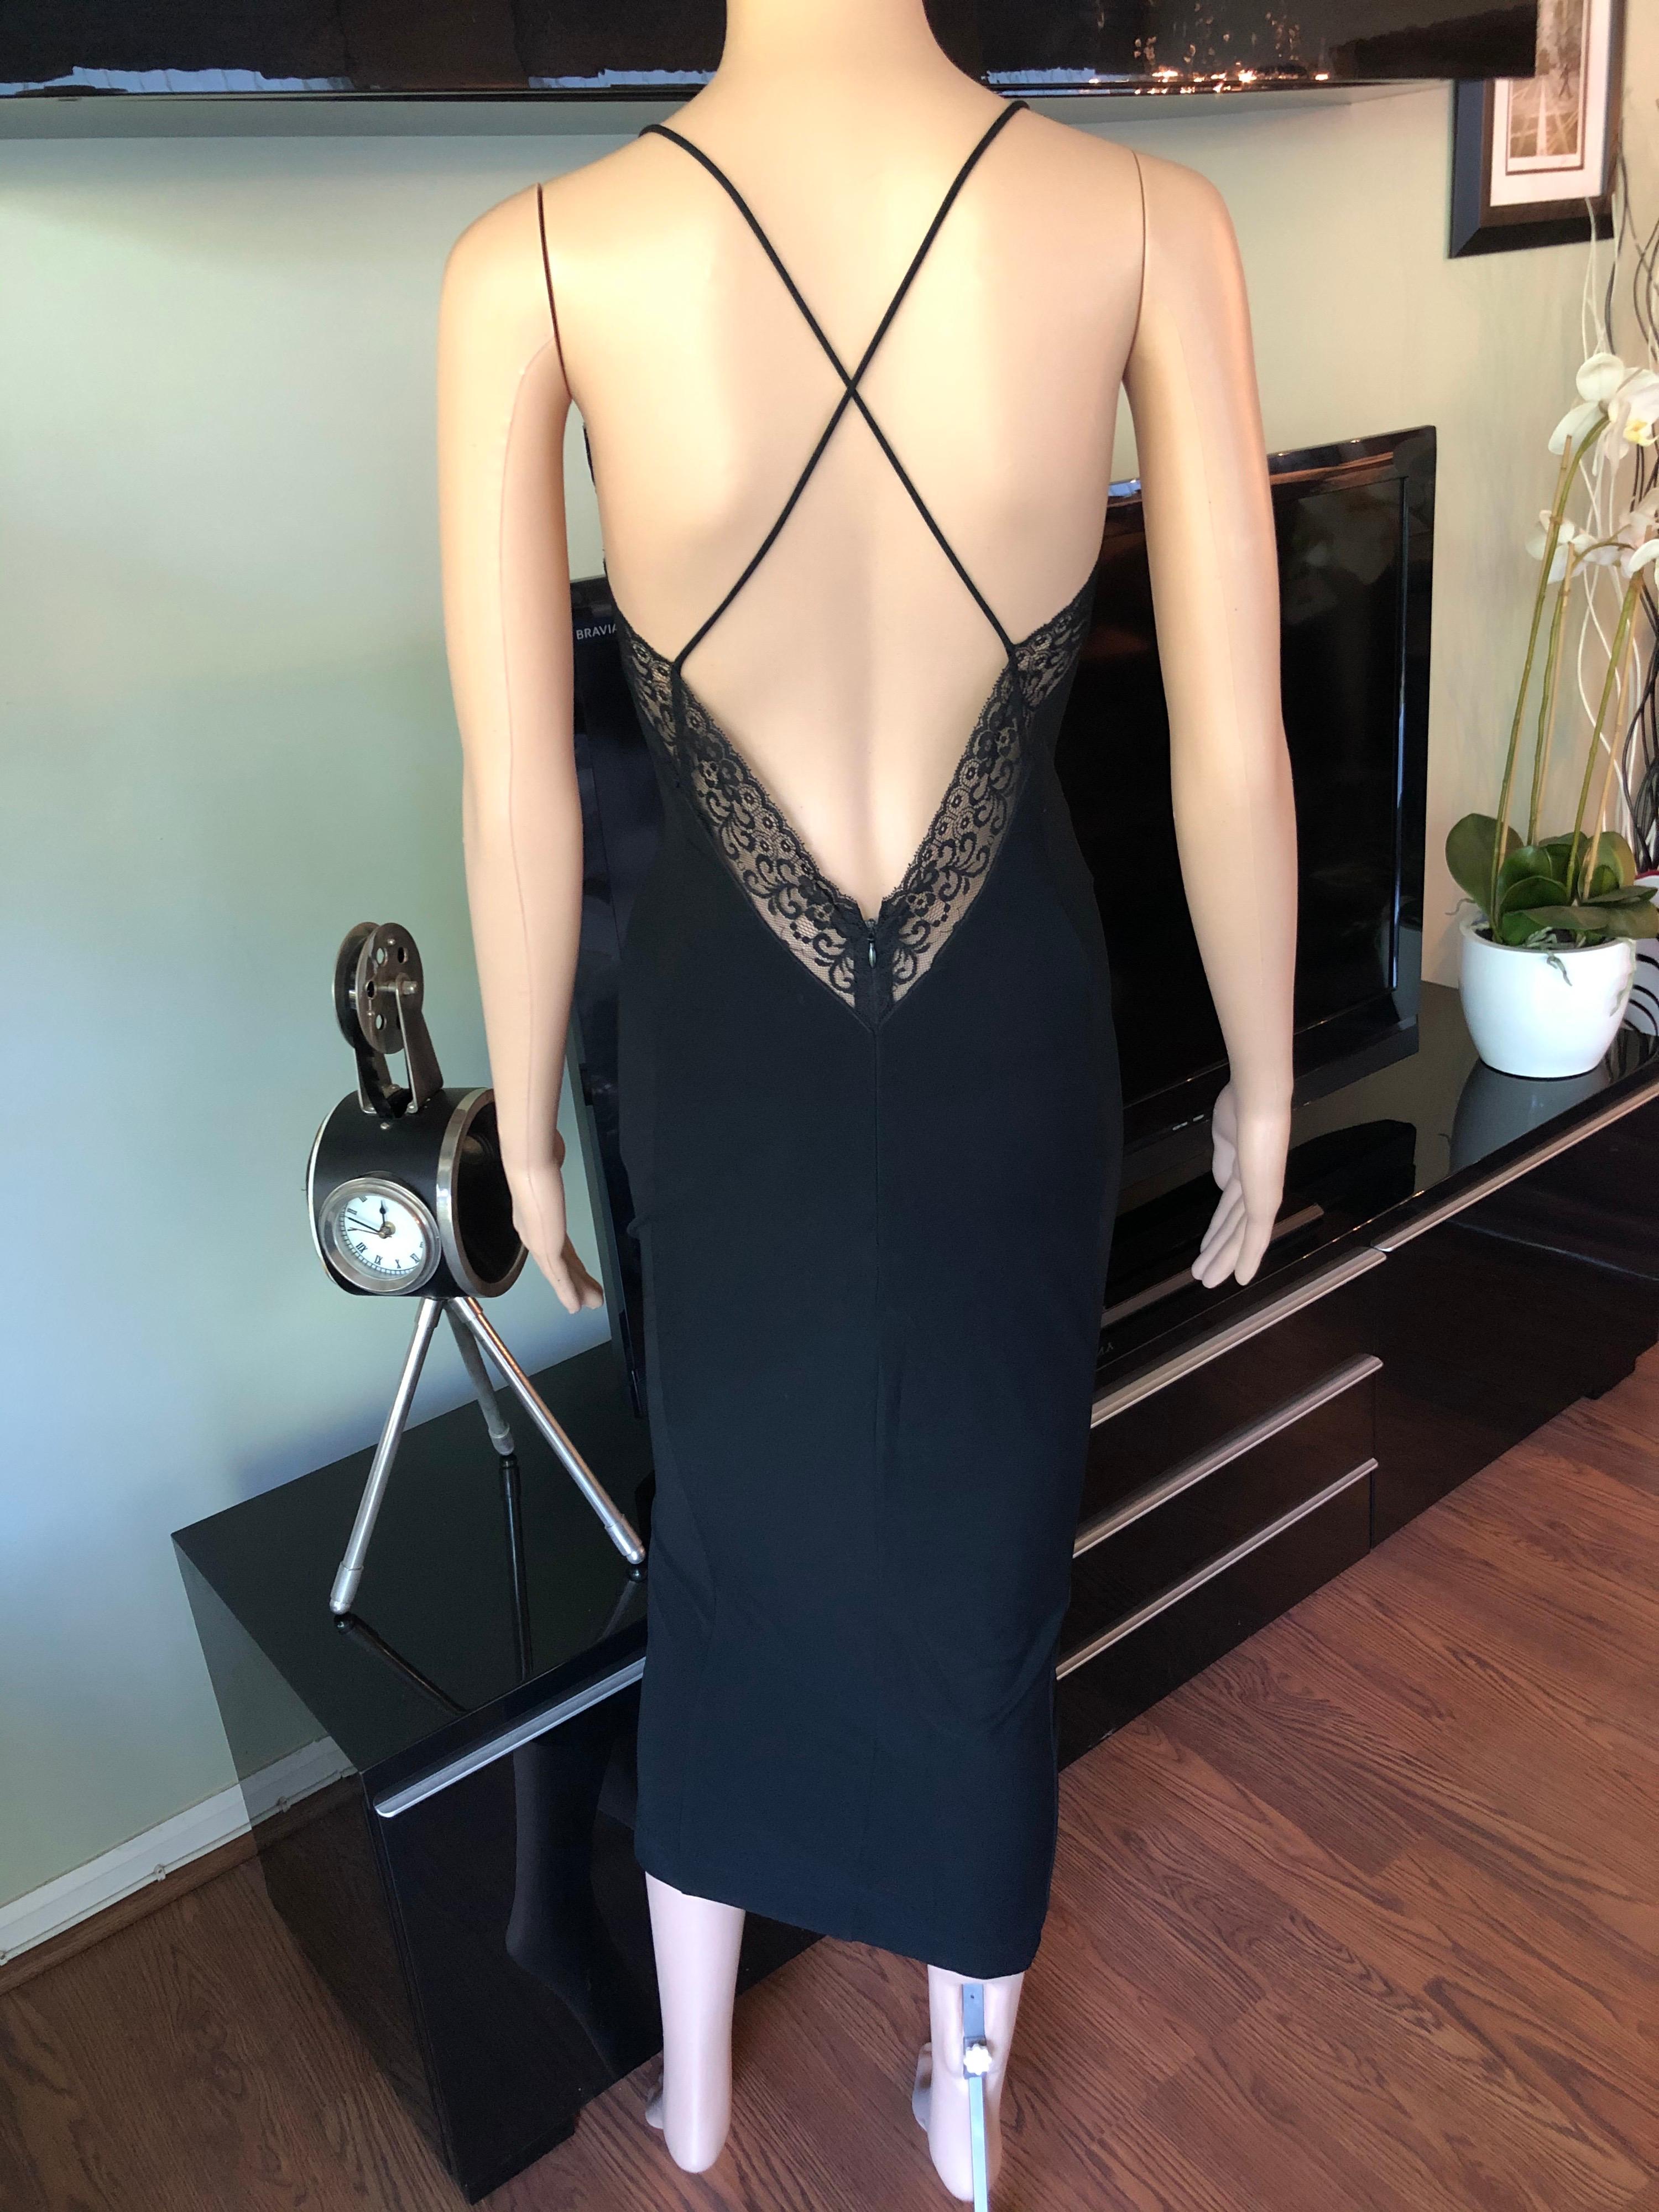 Dolce & Gabbana 1990's Vintage Plunging Neckline Open Back Lace Black Dress IT 40

Dolce & Gabbana lace trimmed fitted dress with plunging V-neck, low back and narrow straps. Please note size tag has been removed.
